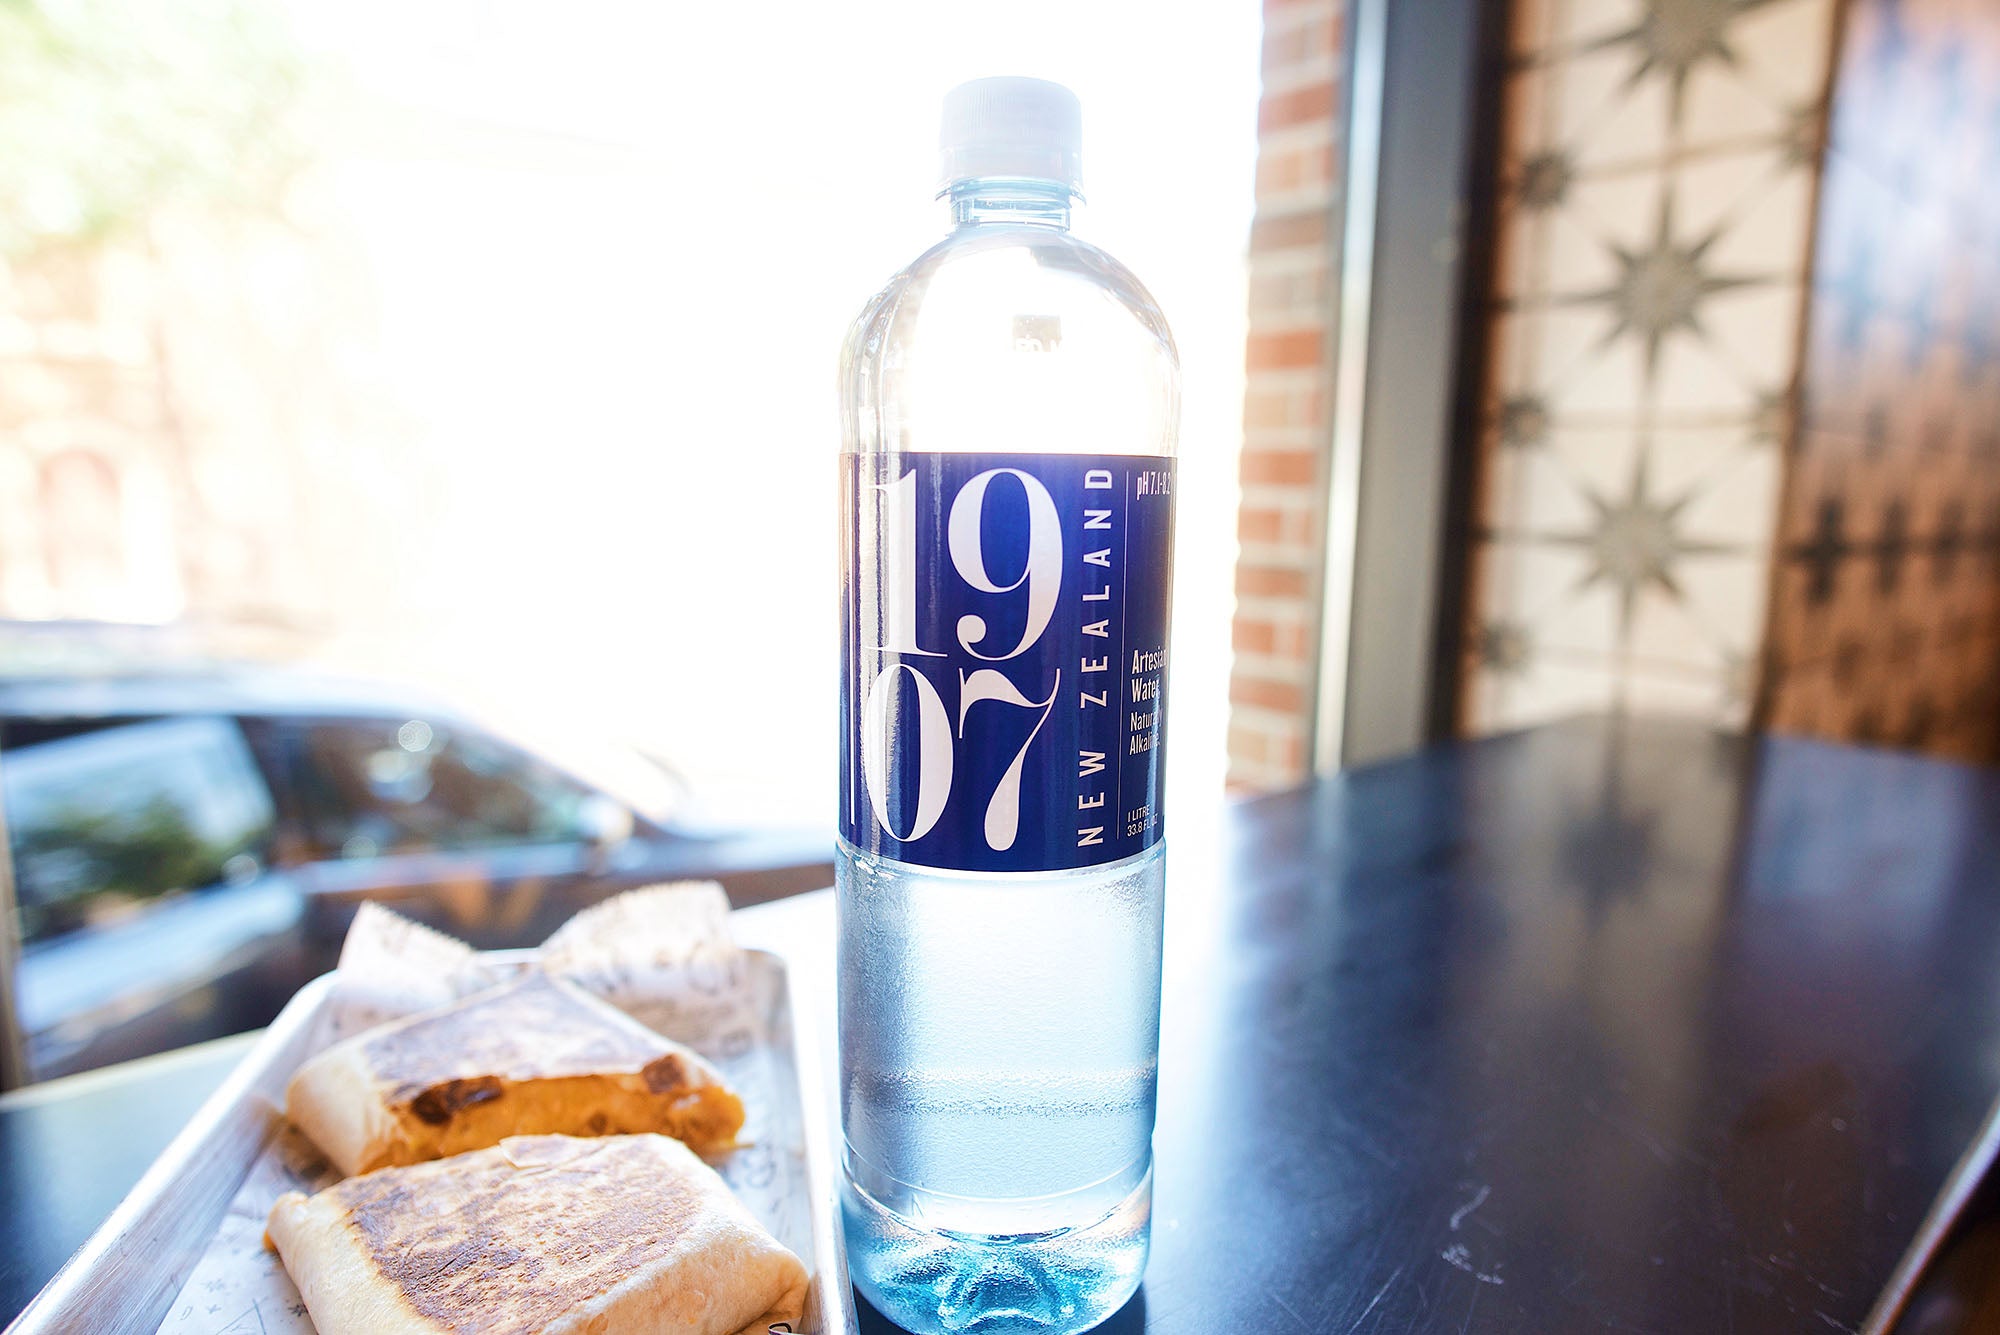 1907 Water: The Alkaline Goodness For Your Body